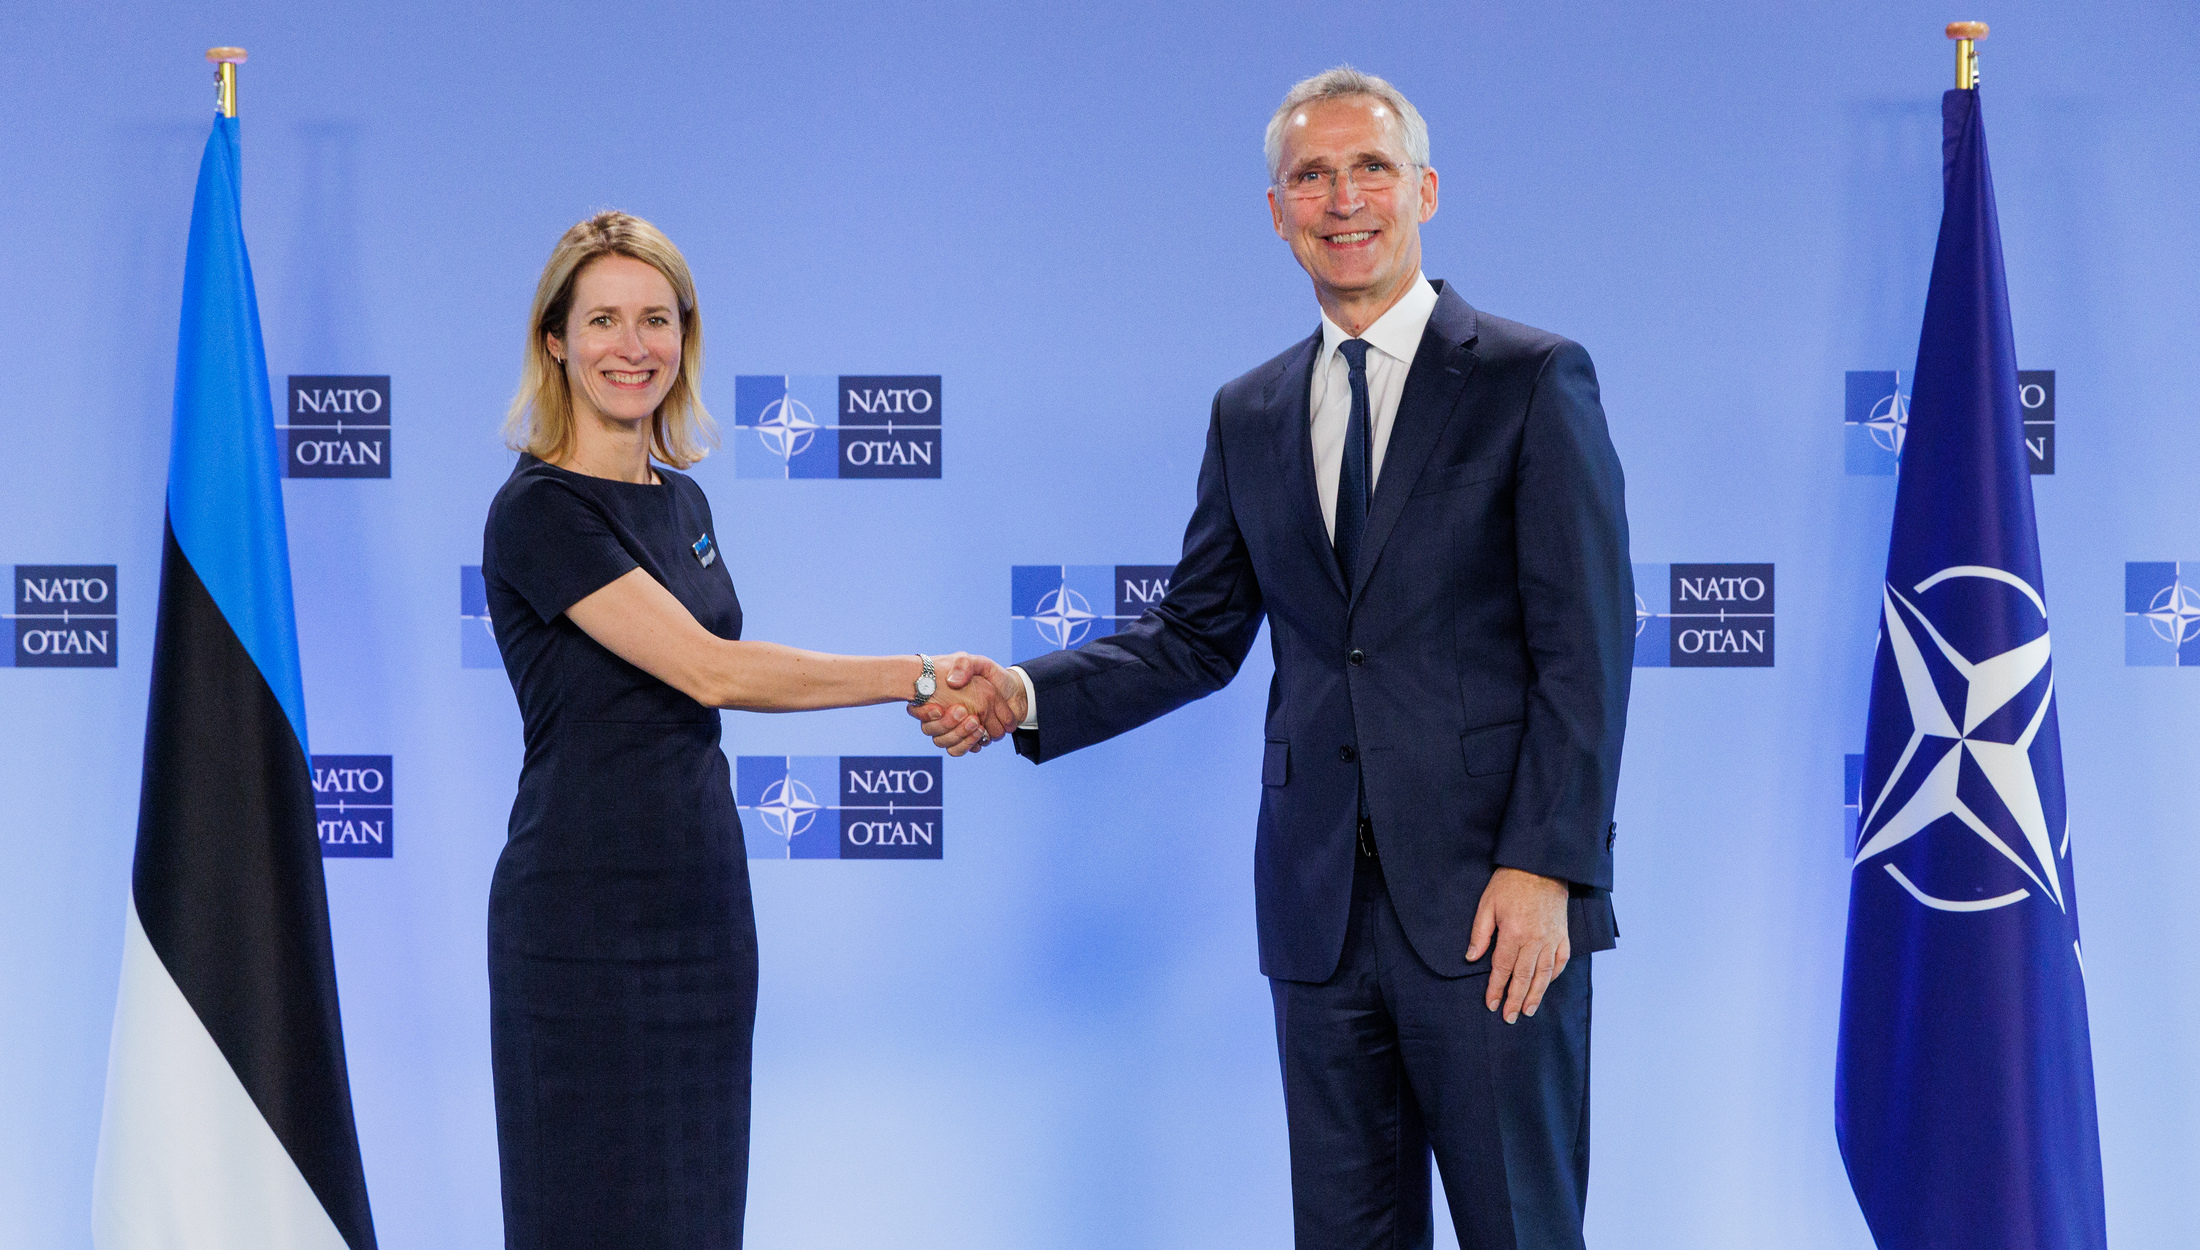 The search for NATO’s new Secretary General – time for a candidate from Central Eastern Europe?